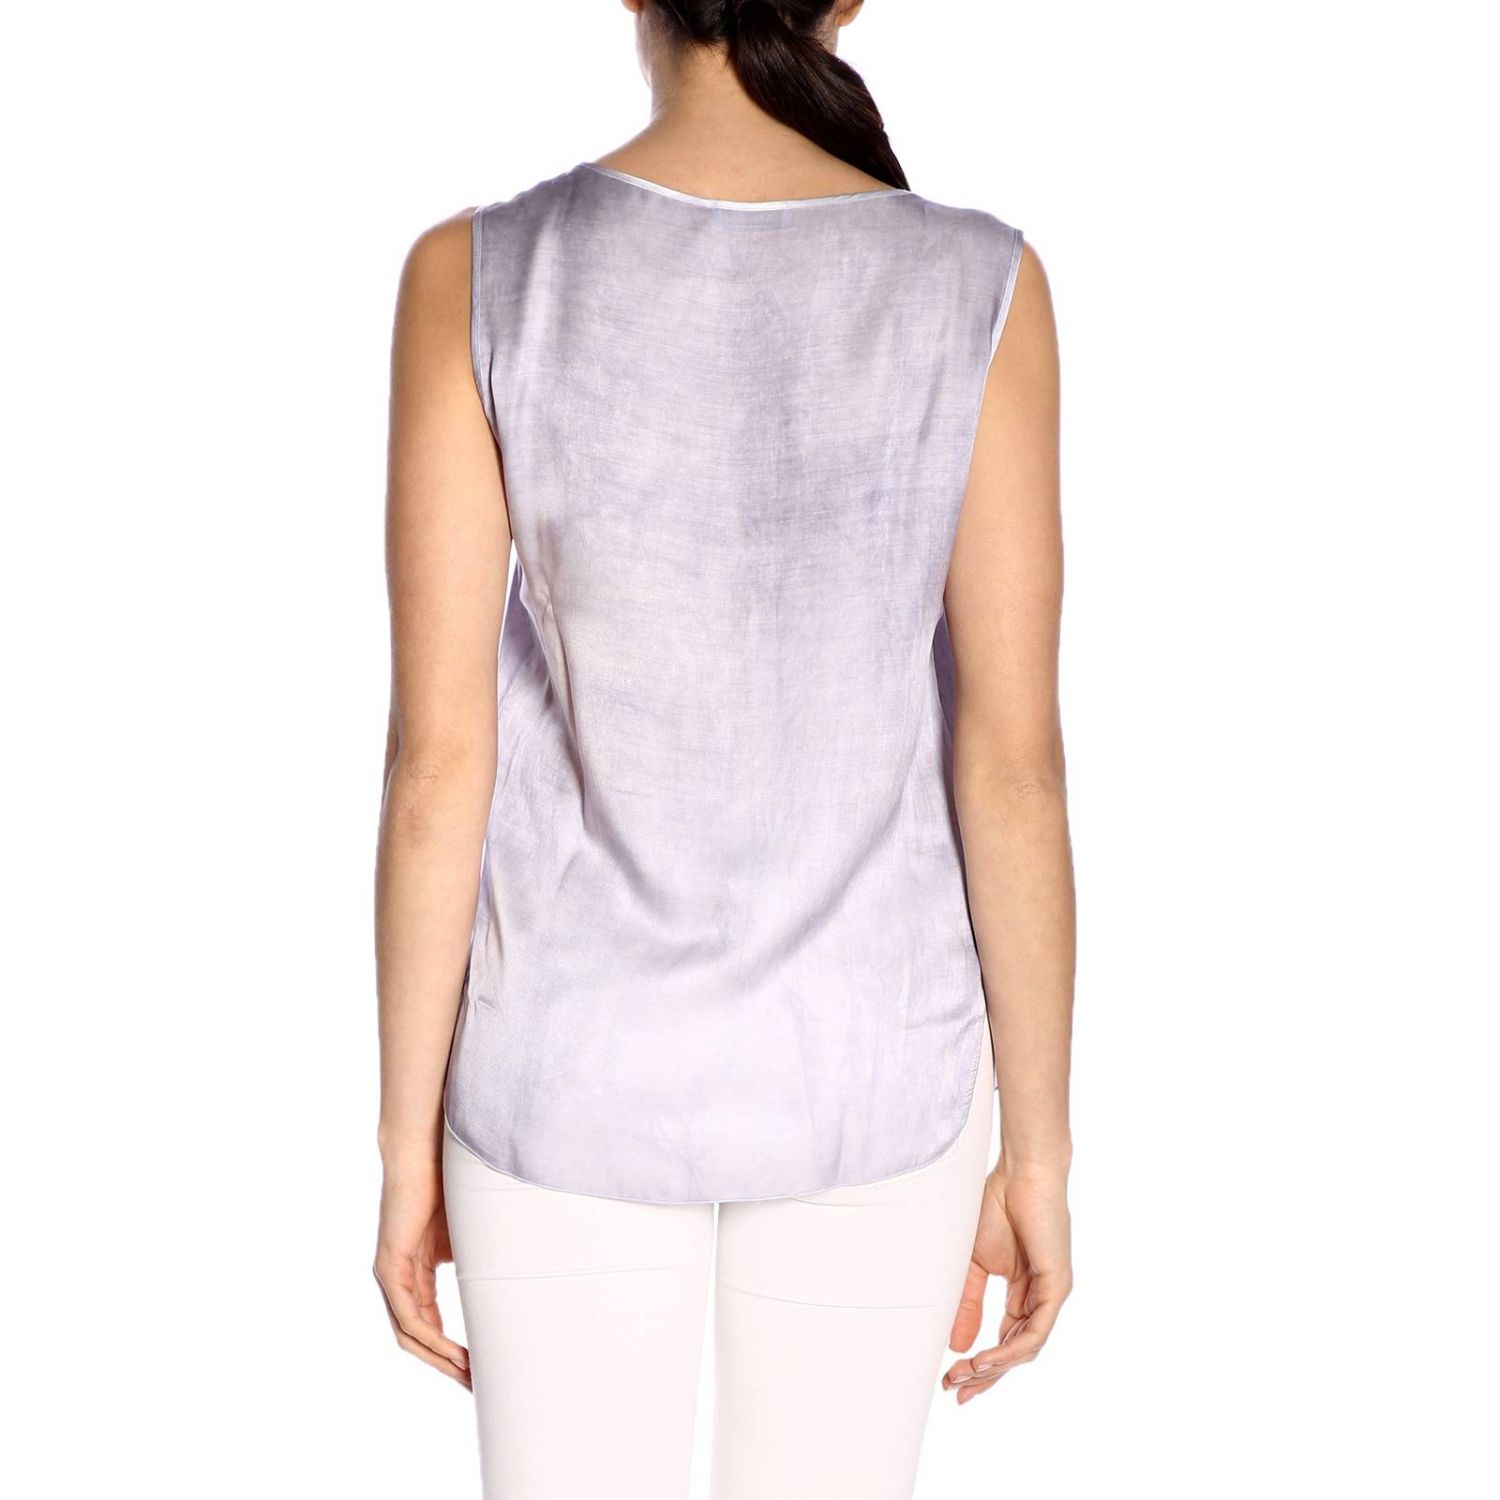 Gran Sasso Outlet: top for woman - Wisteria | Gran Sasso top 61207 ...